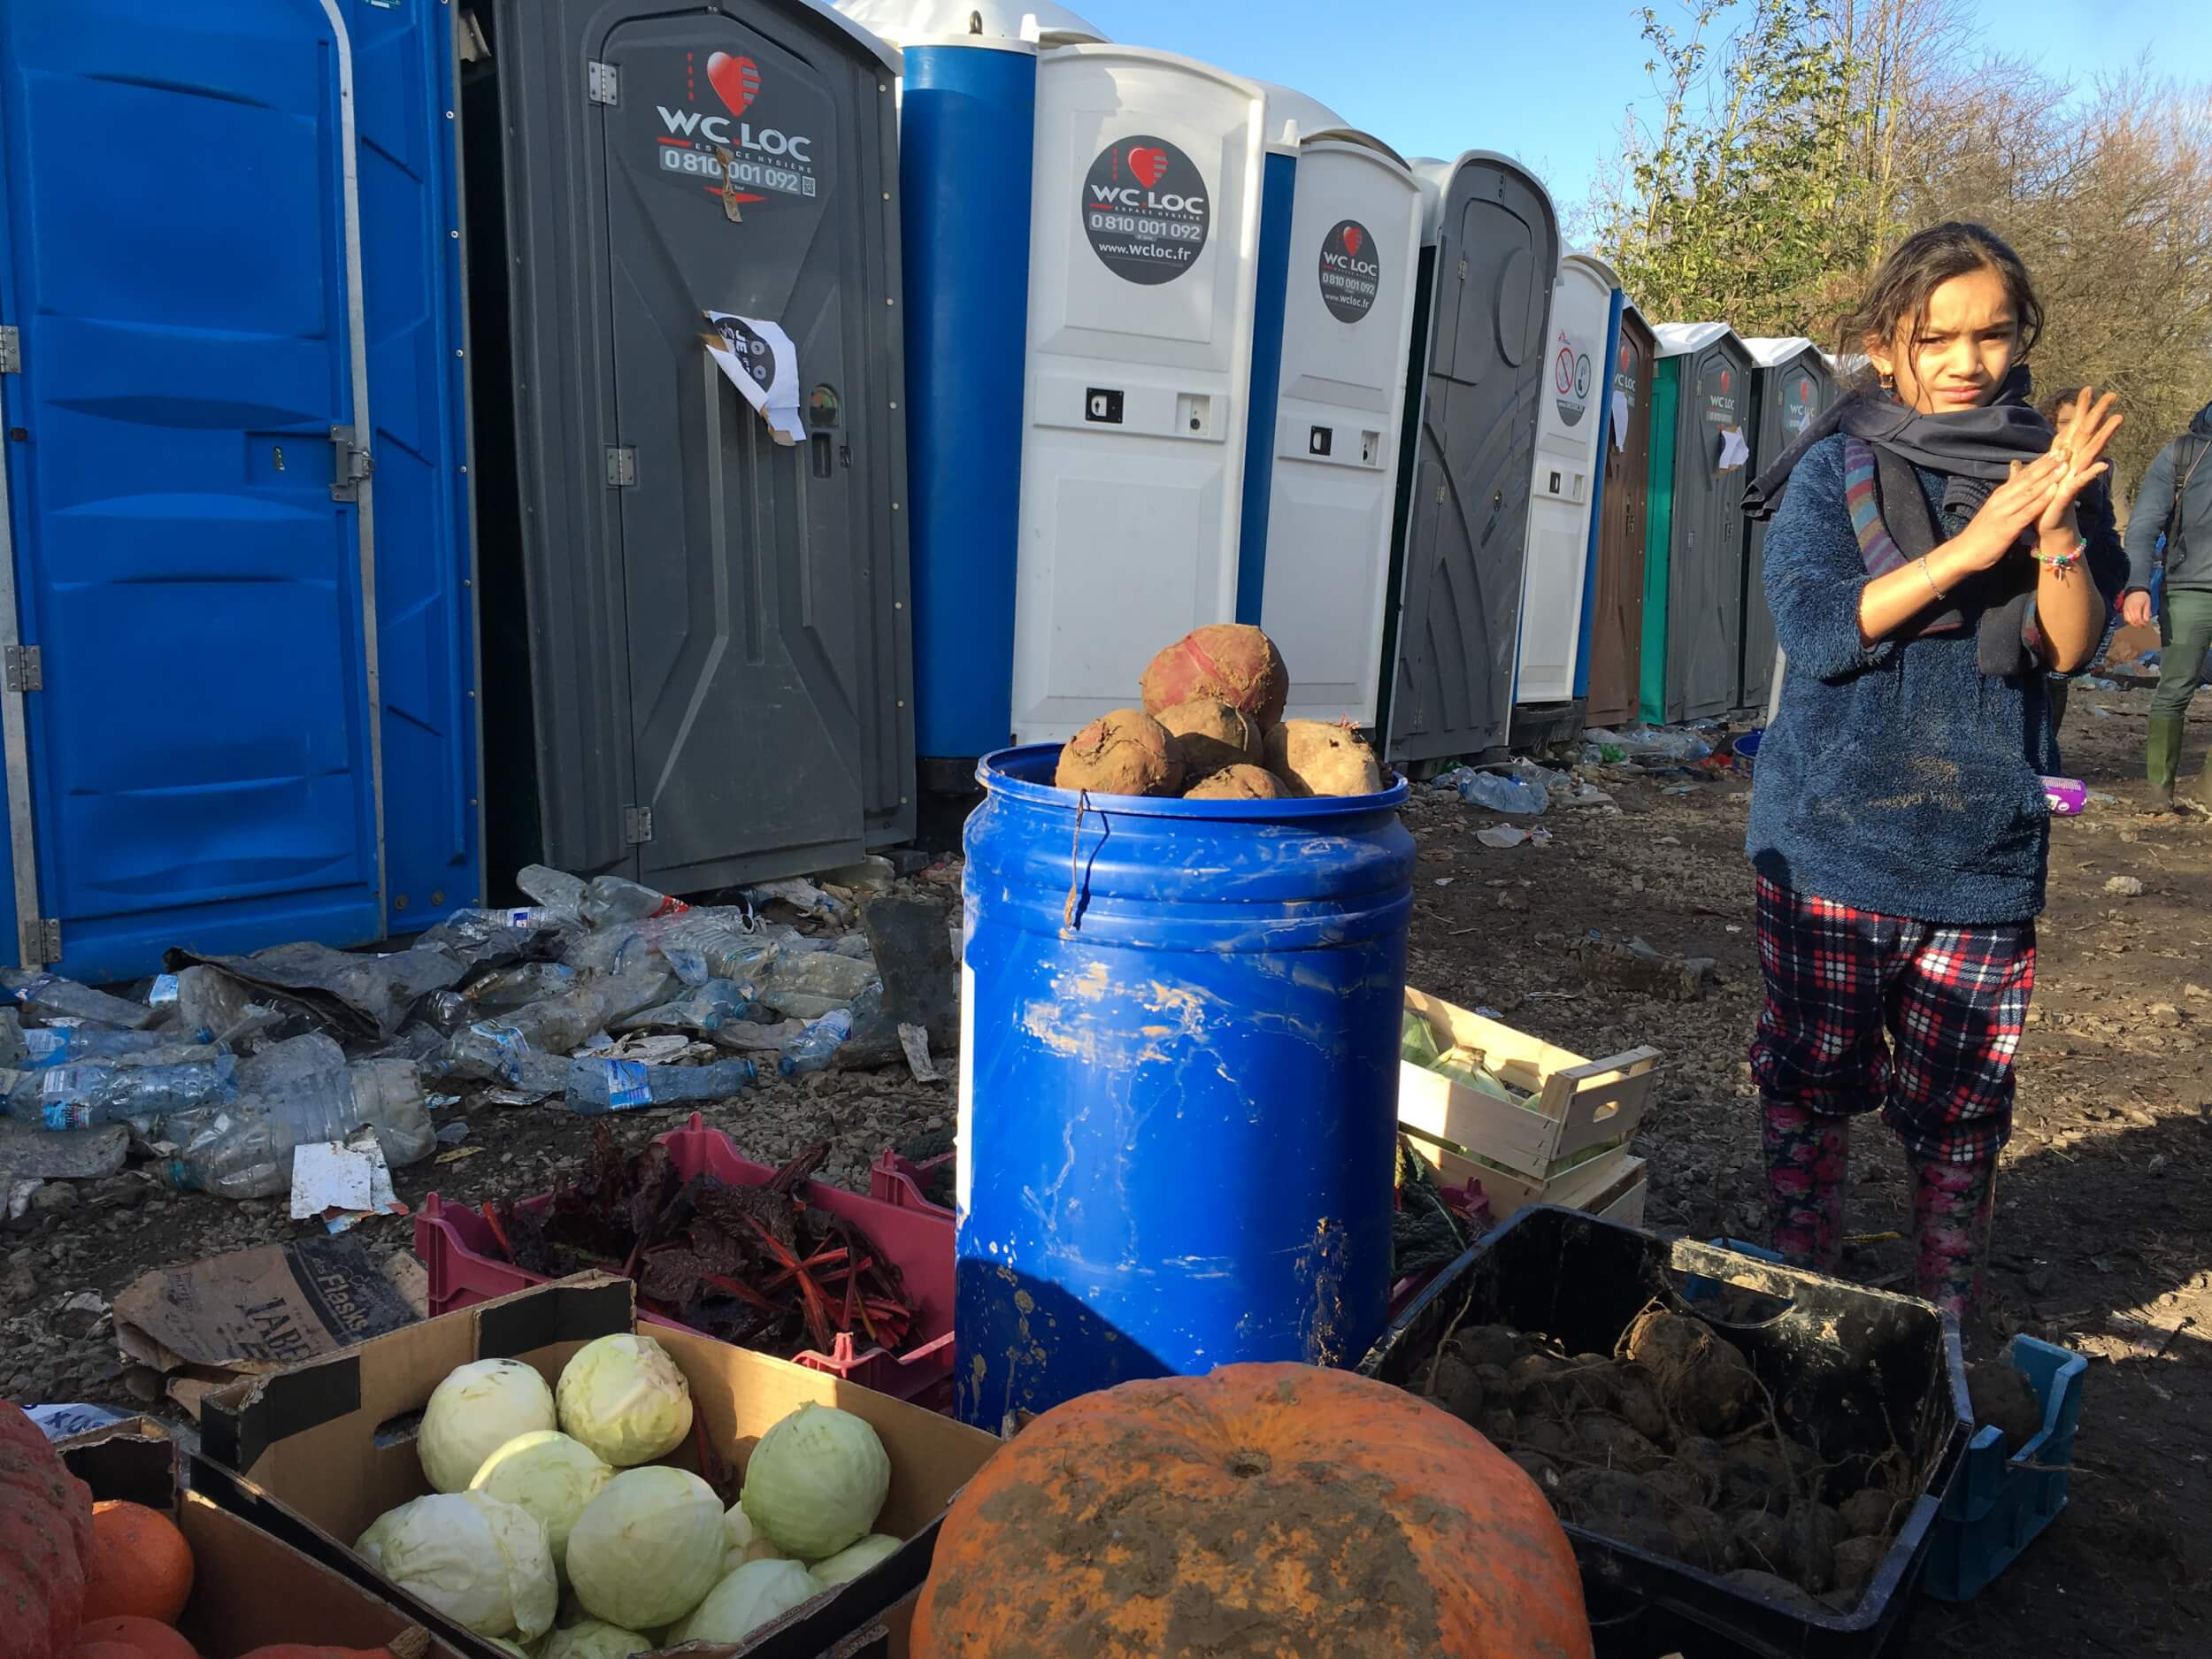 Provisions provided by locals are stocked up next to the port-a-potties of Grande-Synthe. Many volunteers in neighboring U.K. and Belgium arrive in Dunkerque to provide aid during the weekend when refugees will sometimes frantically stock up as the donations can slow to a trickle during the week. (Photo: Katherine Schwartz)